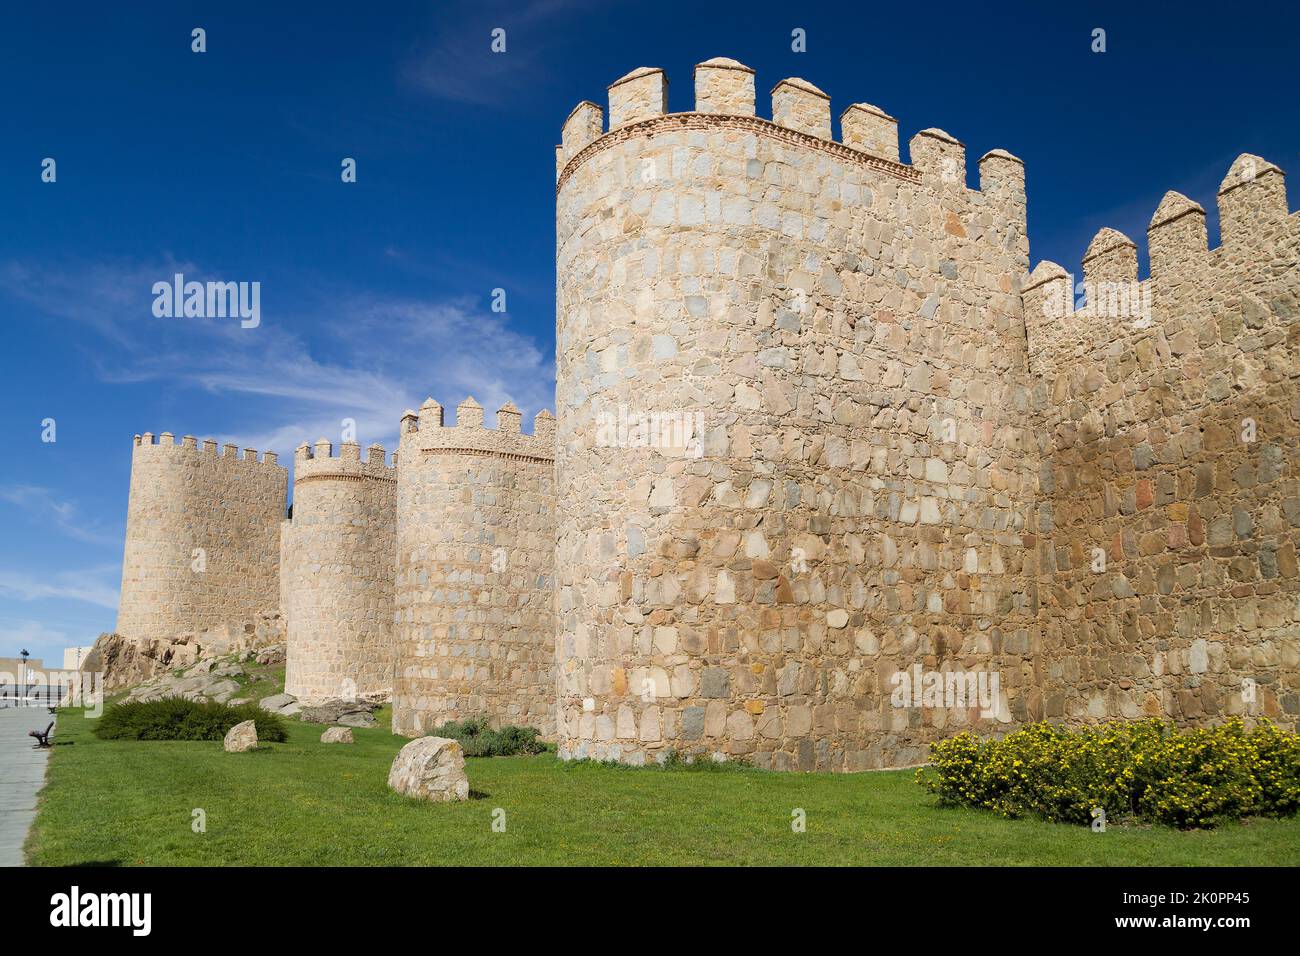 West Towers of the Walls of Avila, Spain. Stock Photo